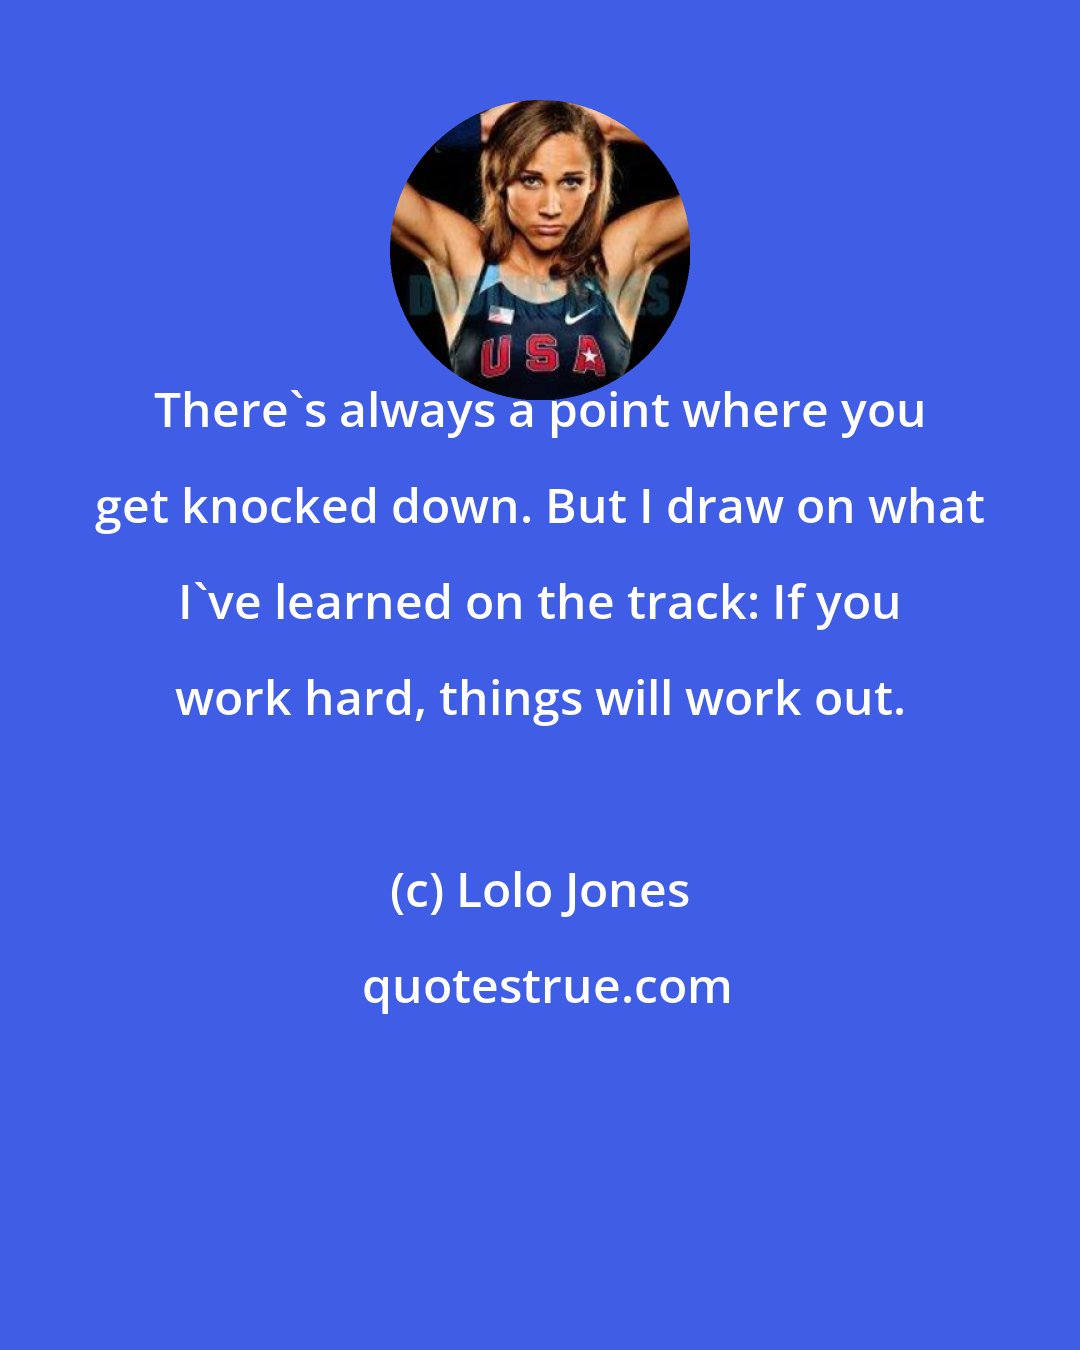 Lolo Jones: There's always a point where you get knocked down. But I draw on what I've learned on the track: If you work hard, things will work out.